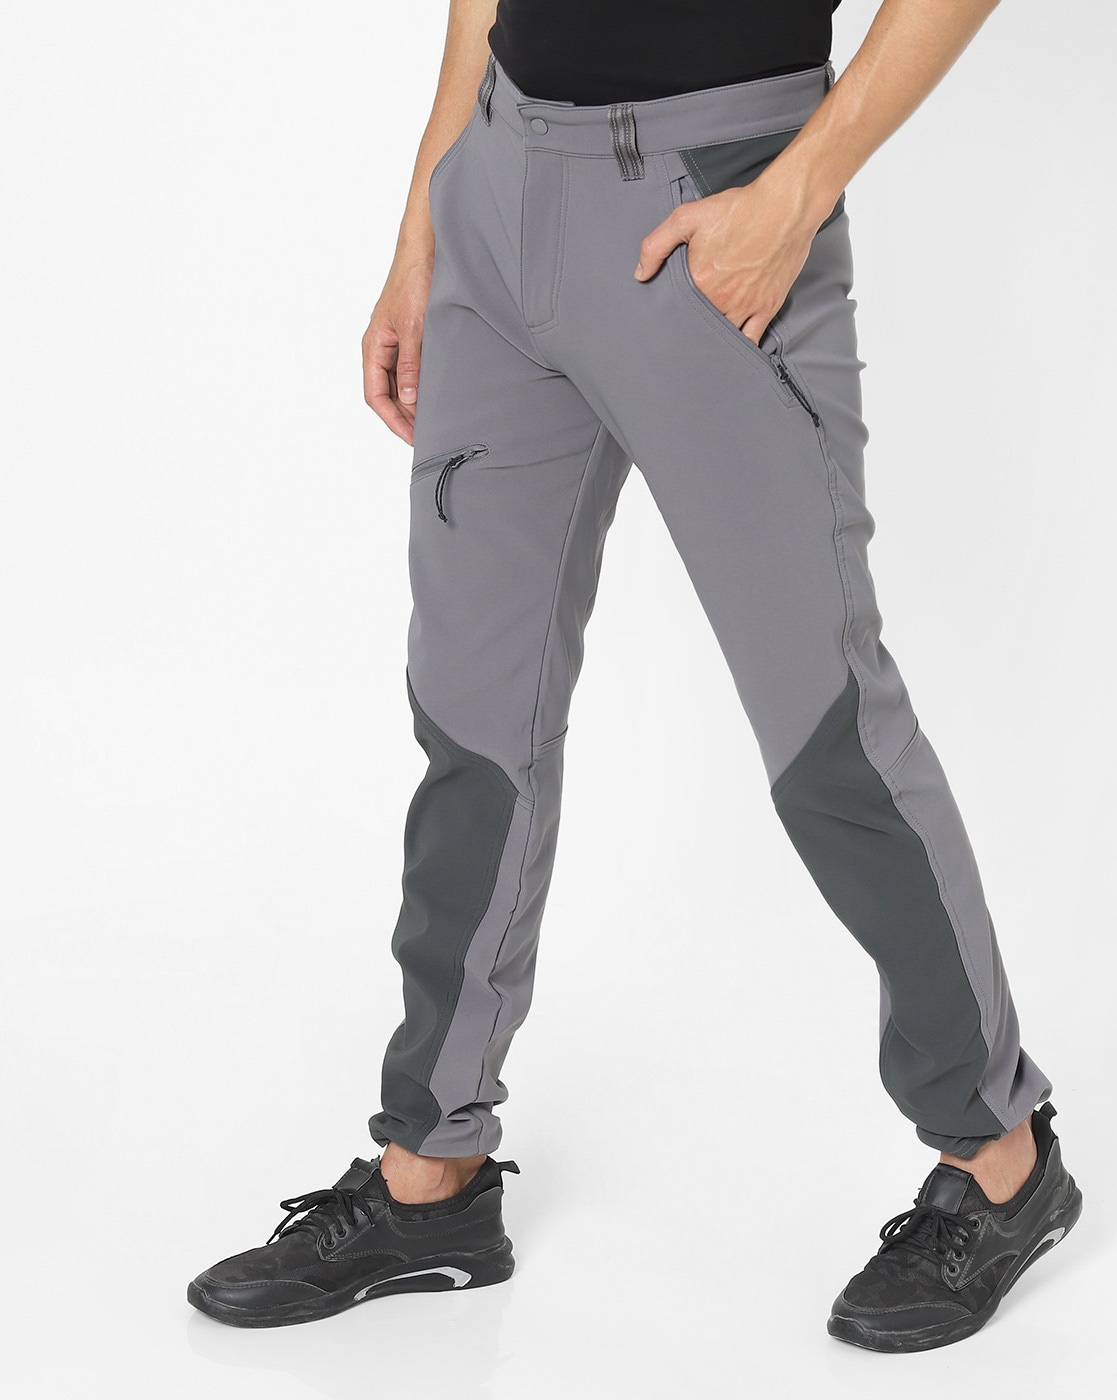 COLUMBIA SILVER RIDGE CONVERTIBLE PANT APPAREL GRILL | The Athlete's Foot